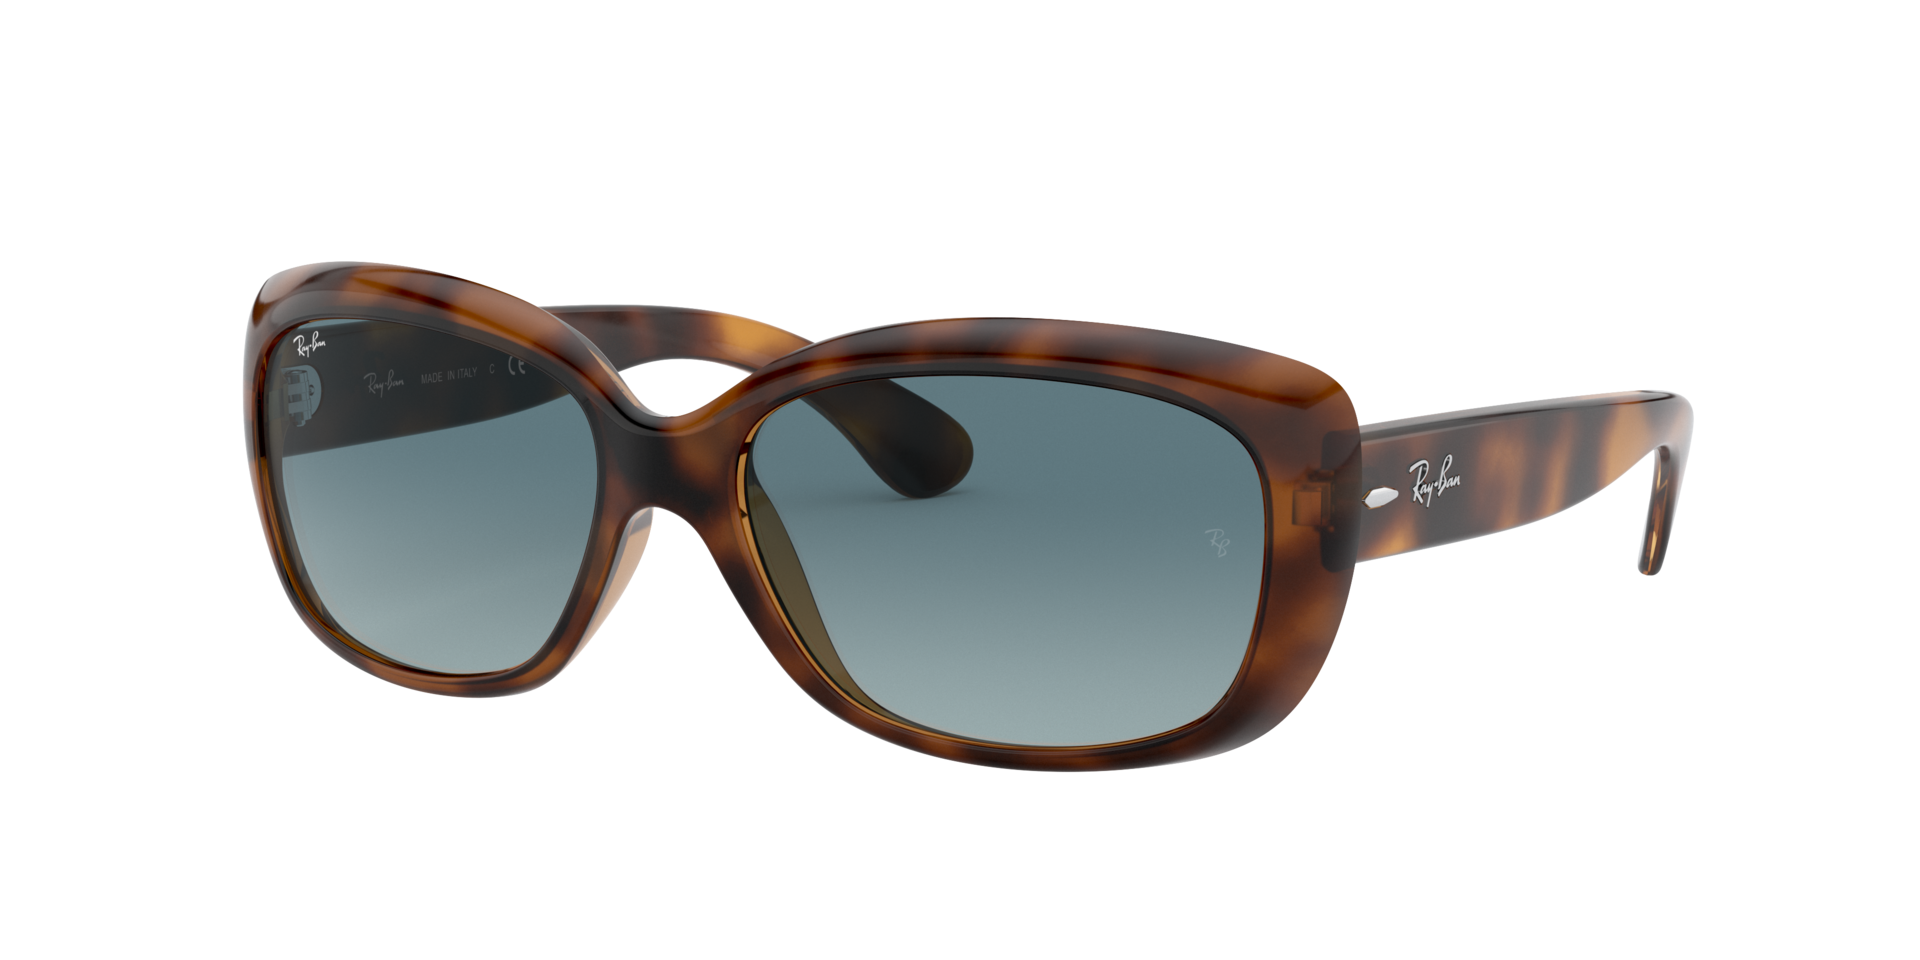 Buy Ray-Ban Rb4101 Sunglasses Online.